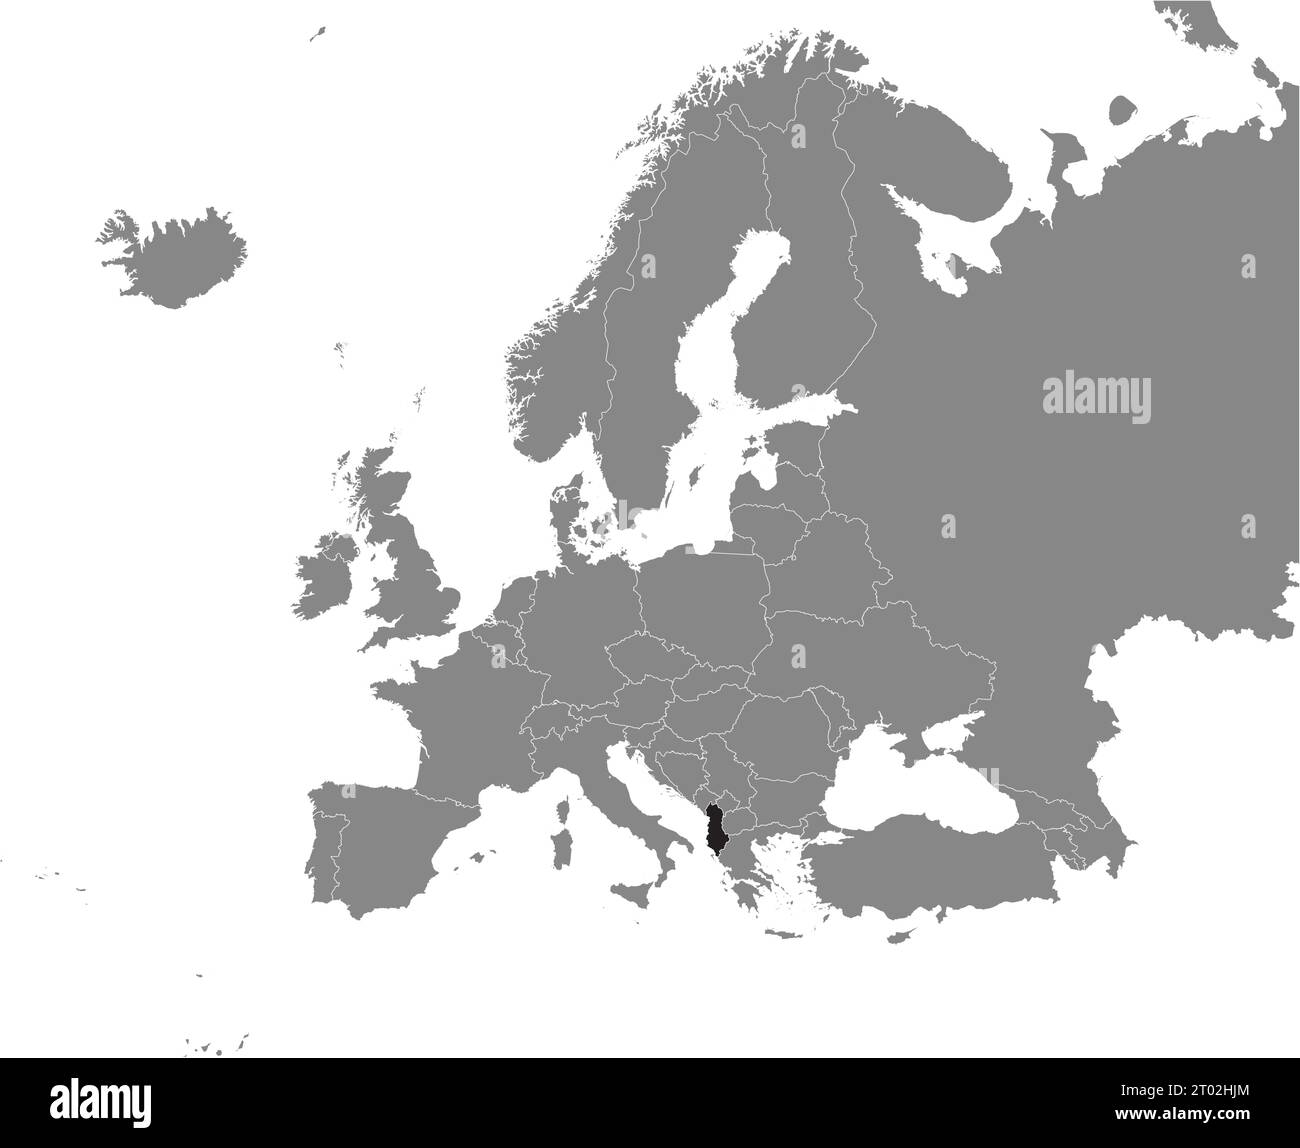 Black CMYK national map of ALBANIA inside detailed gray blank political map of European continent on transparent background using Mercator projection Stock Vector